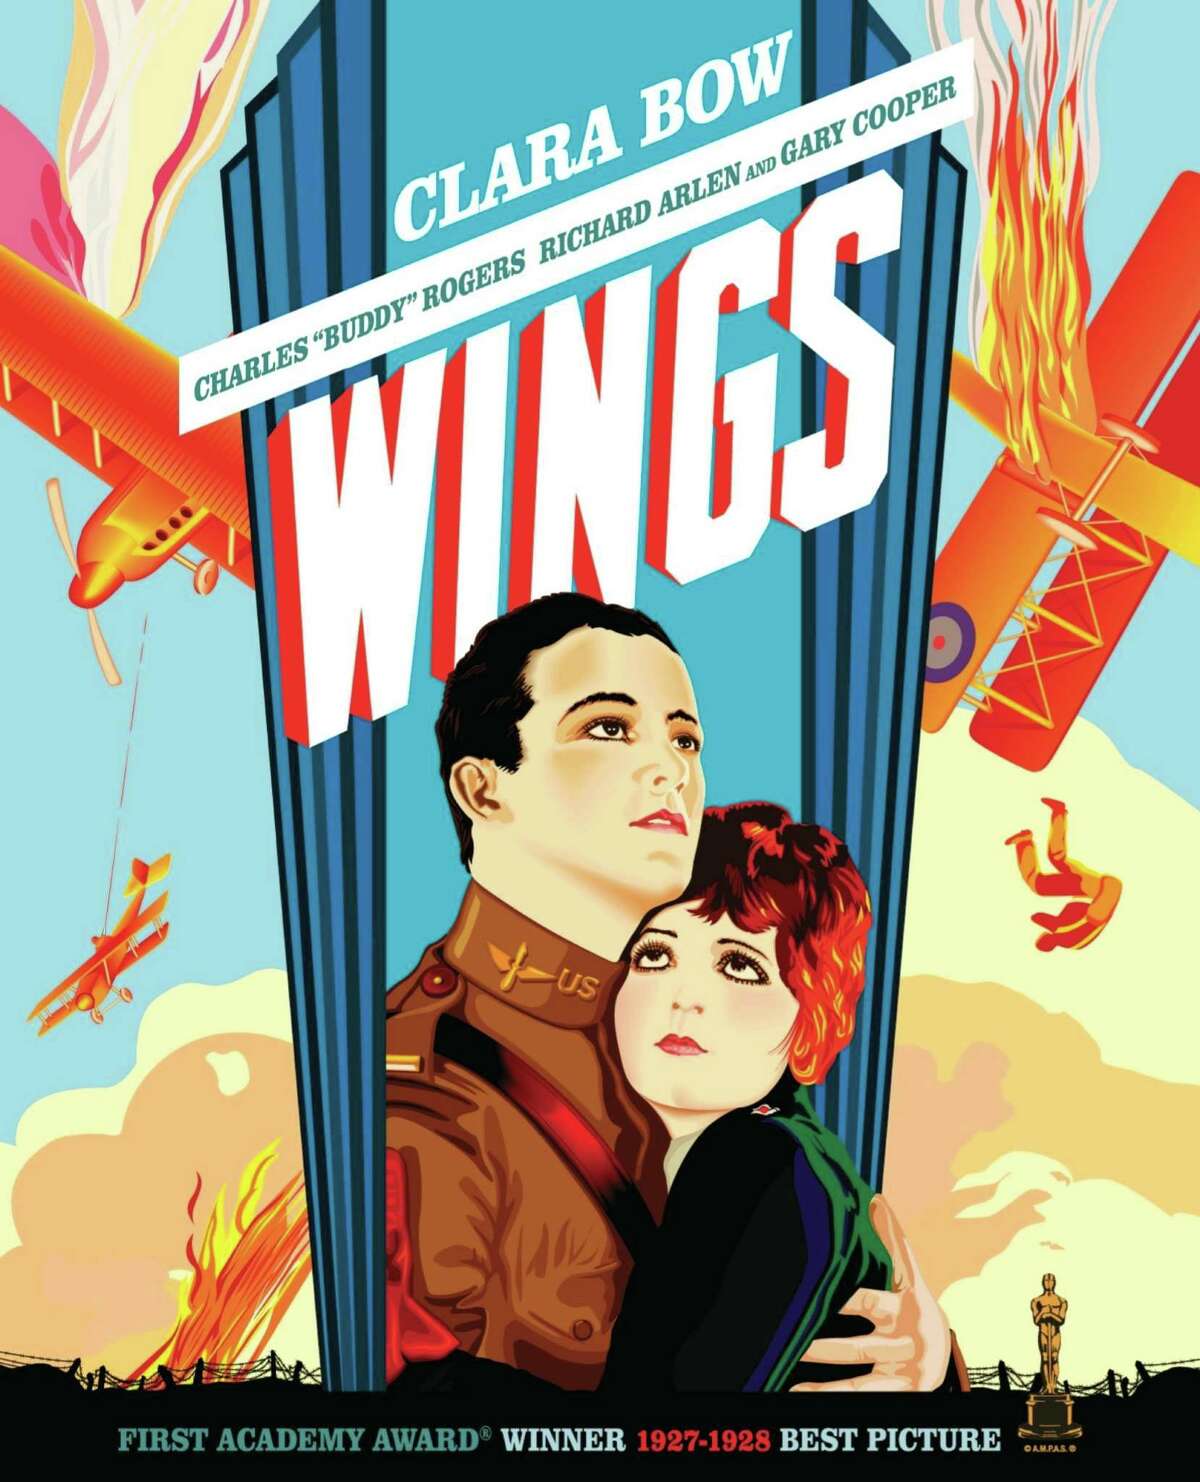 NYS Writers Institute "Wings," the first Academy Award-winning film, will be shown at the University at Albany's Page Hall on April 24.